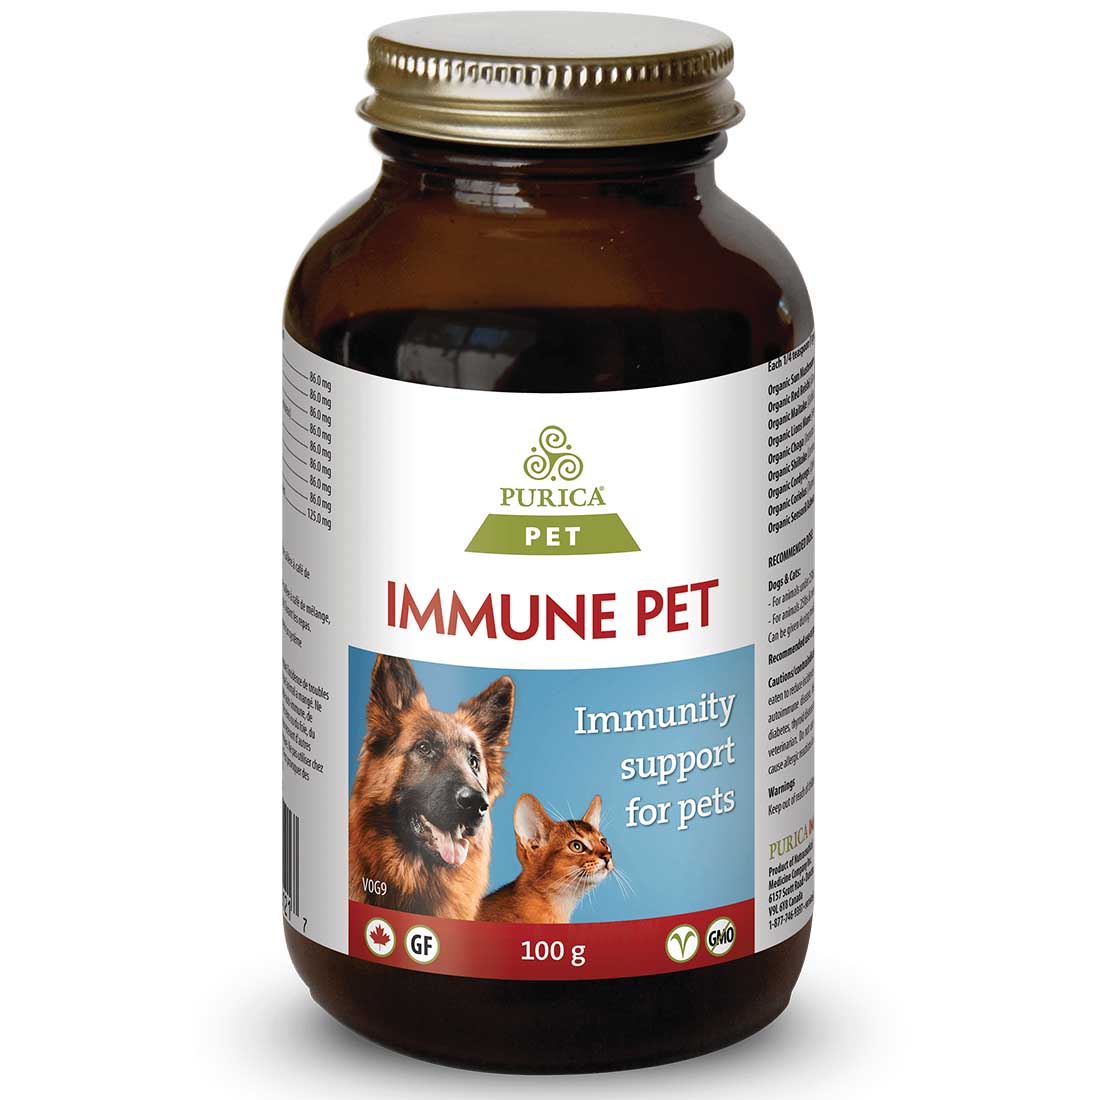 Purica Pet Immune Pet Immunity Support (Dogs, Cats & Small Animals), 100g